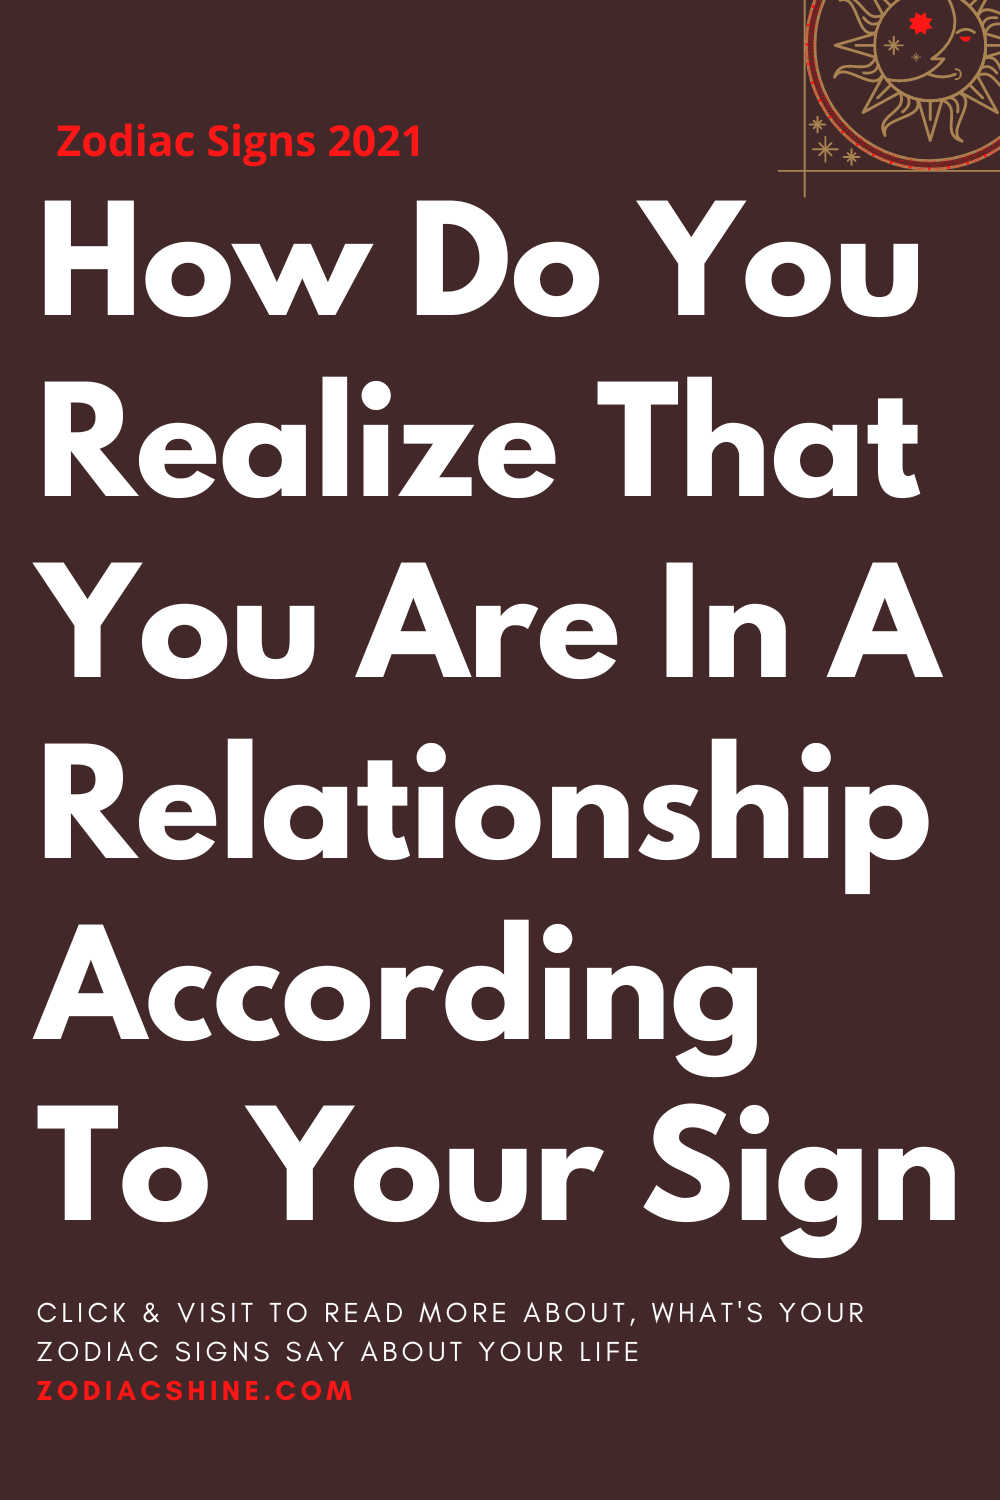 How Do You Realize That You Are In A Relationship According To Your Sign